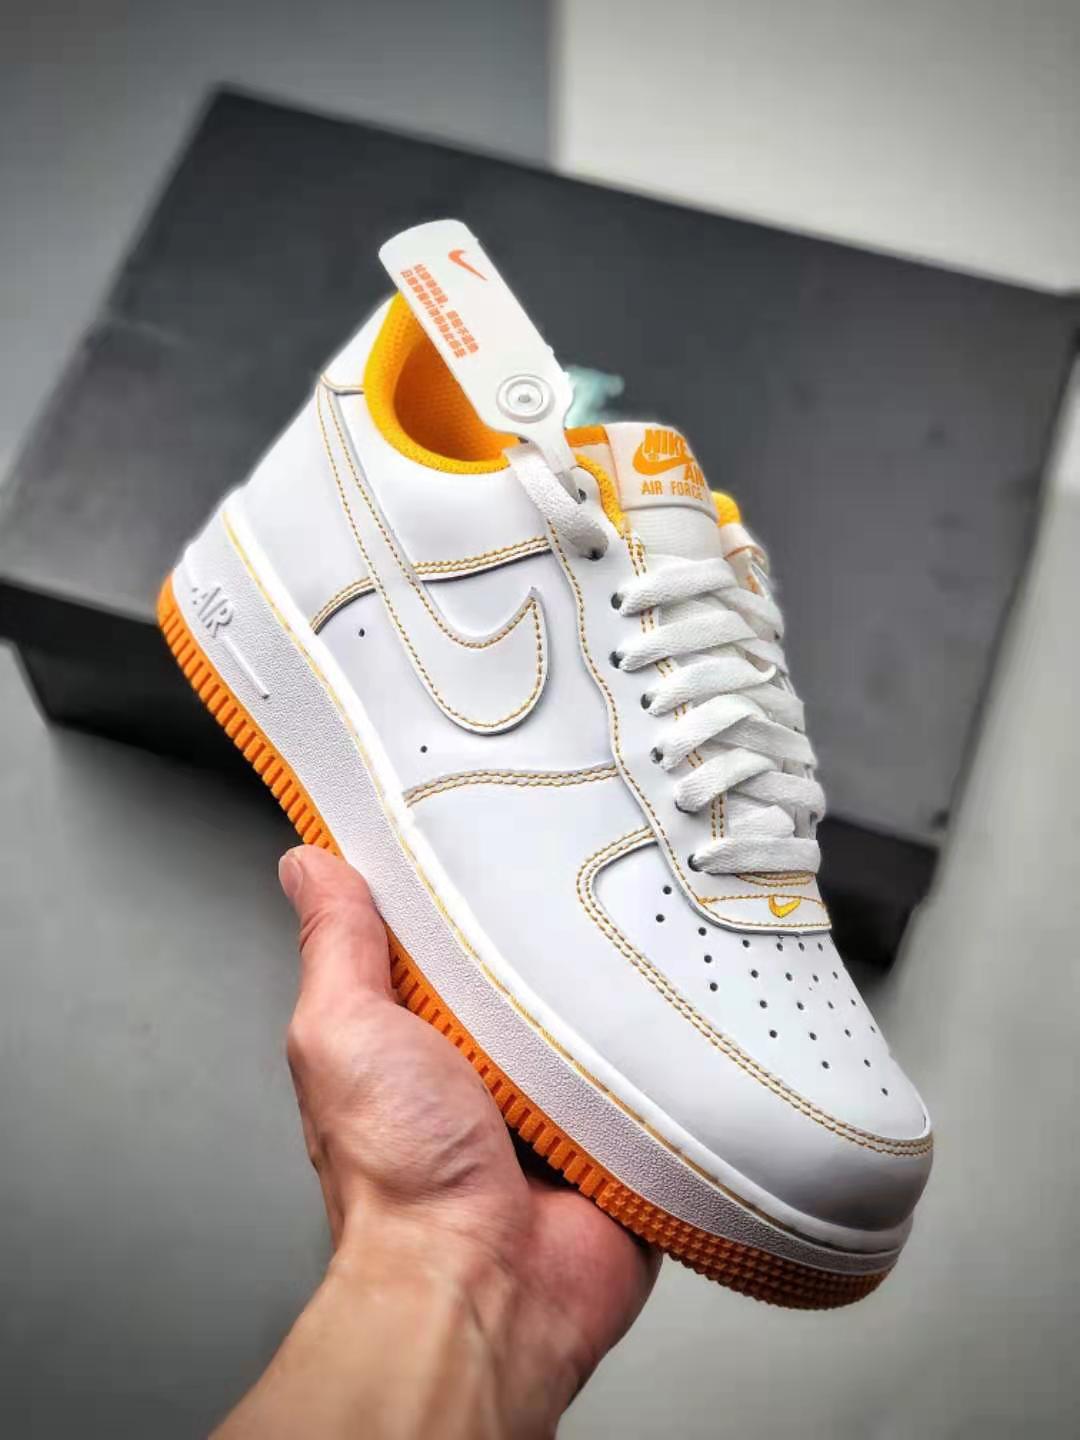 Nike Air Force 1 '07 'Contrast Stitch - White Laser Orange' CV1724-102 - Stylish and vibrant sneakers for men and women